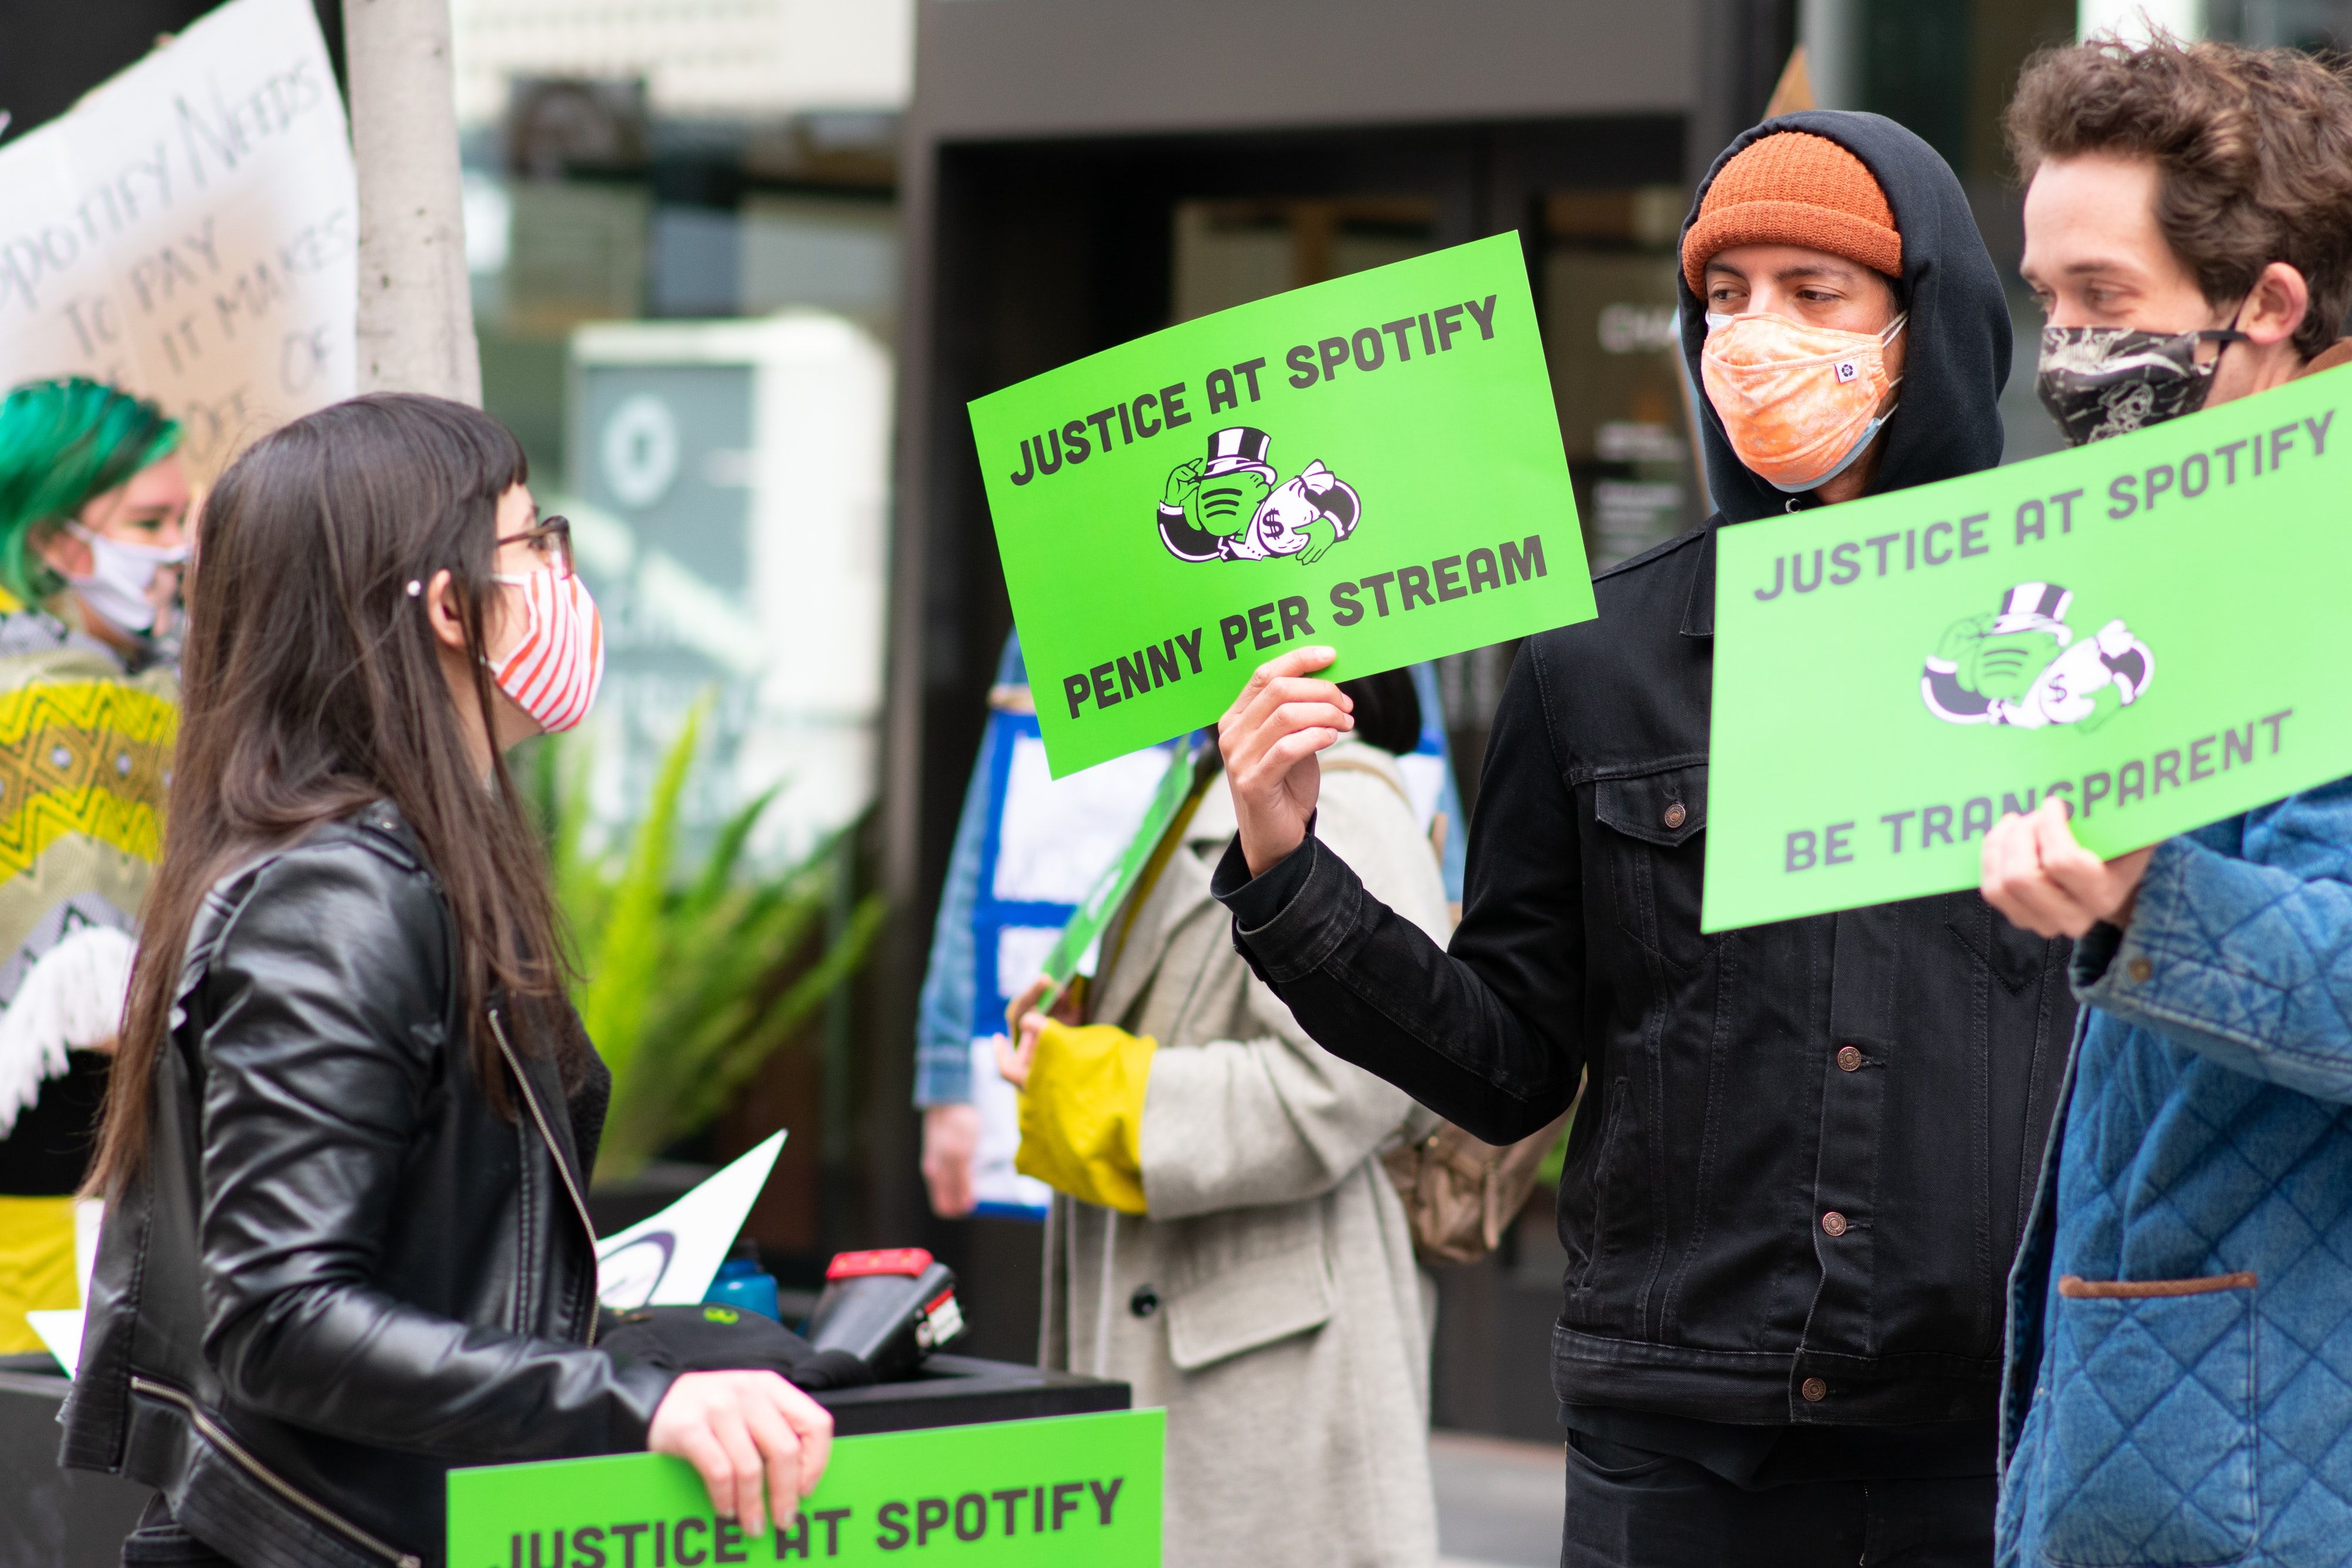 people protesting against spotify's payments per stream